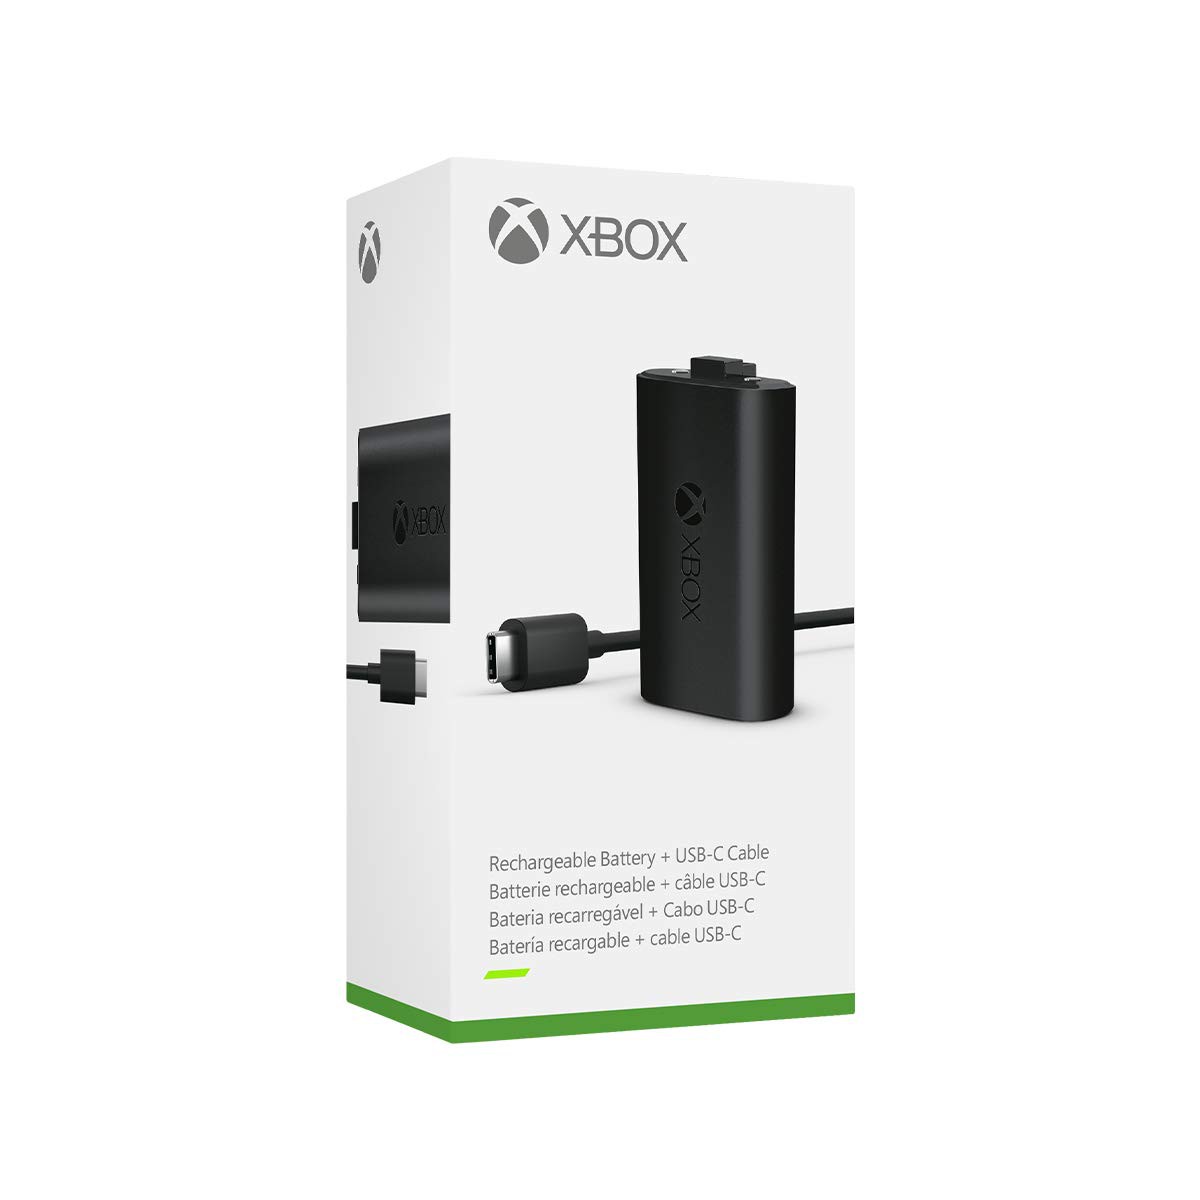 Rechargeable Battery + USB-C Cable (Complete) Kopen | Xbox Series X Hardware